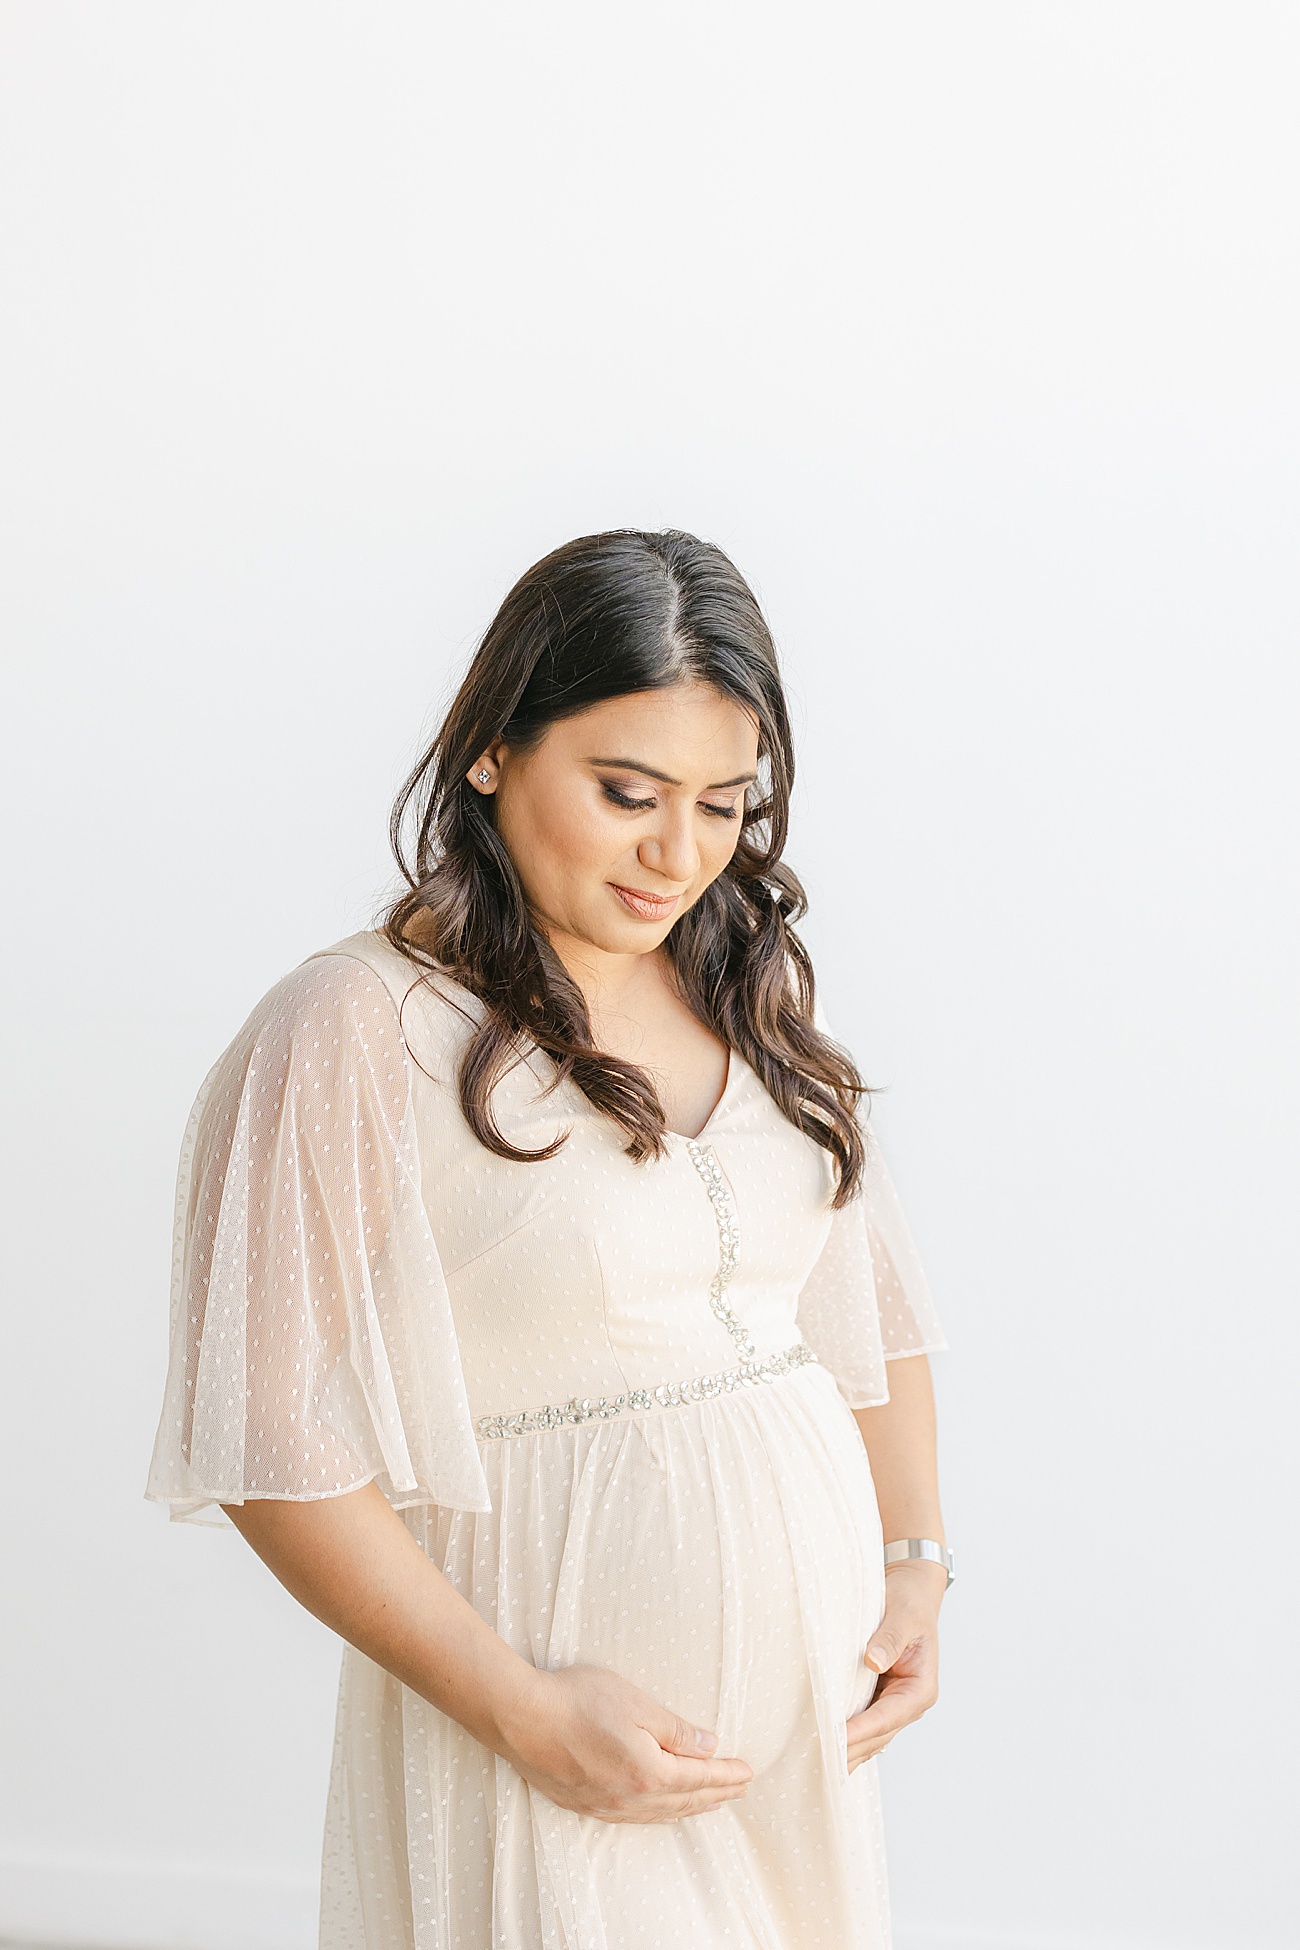 Beautiful expecting Mom wearing off white maxi dress with swiss dots. Photo by Sana Ahmed Photography.